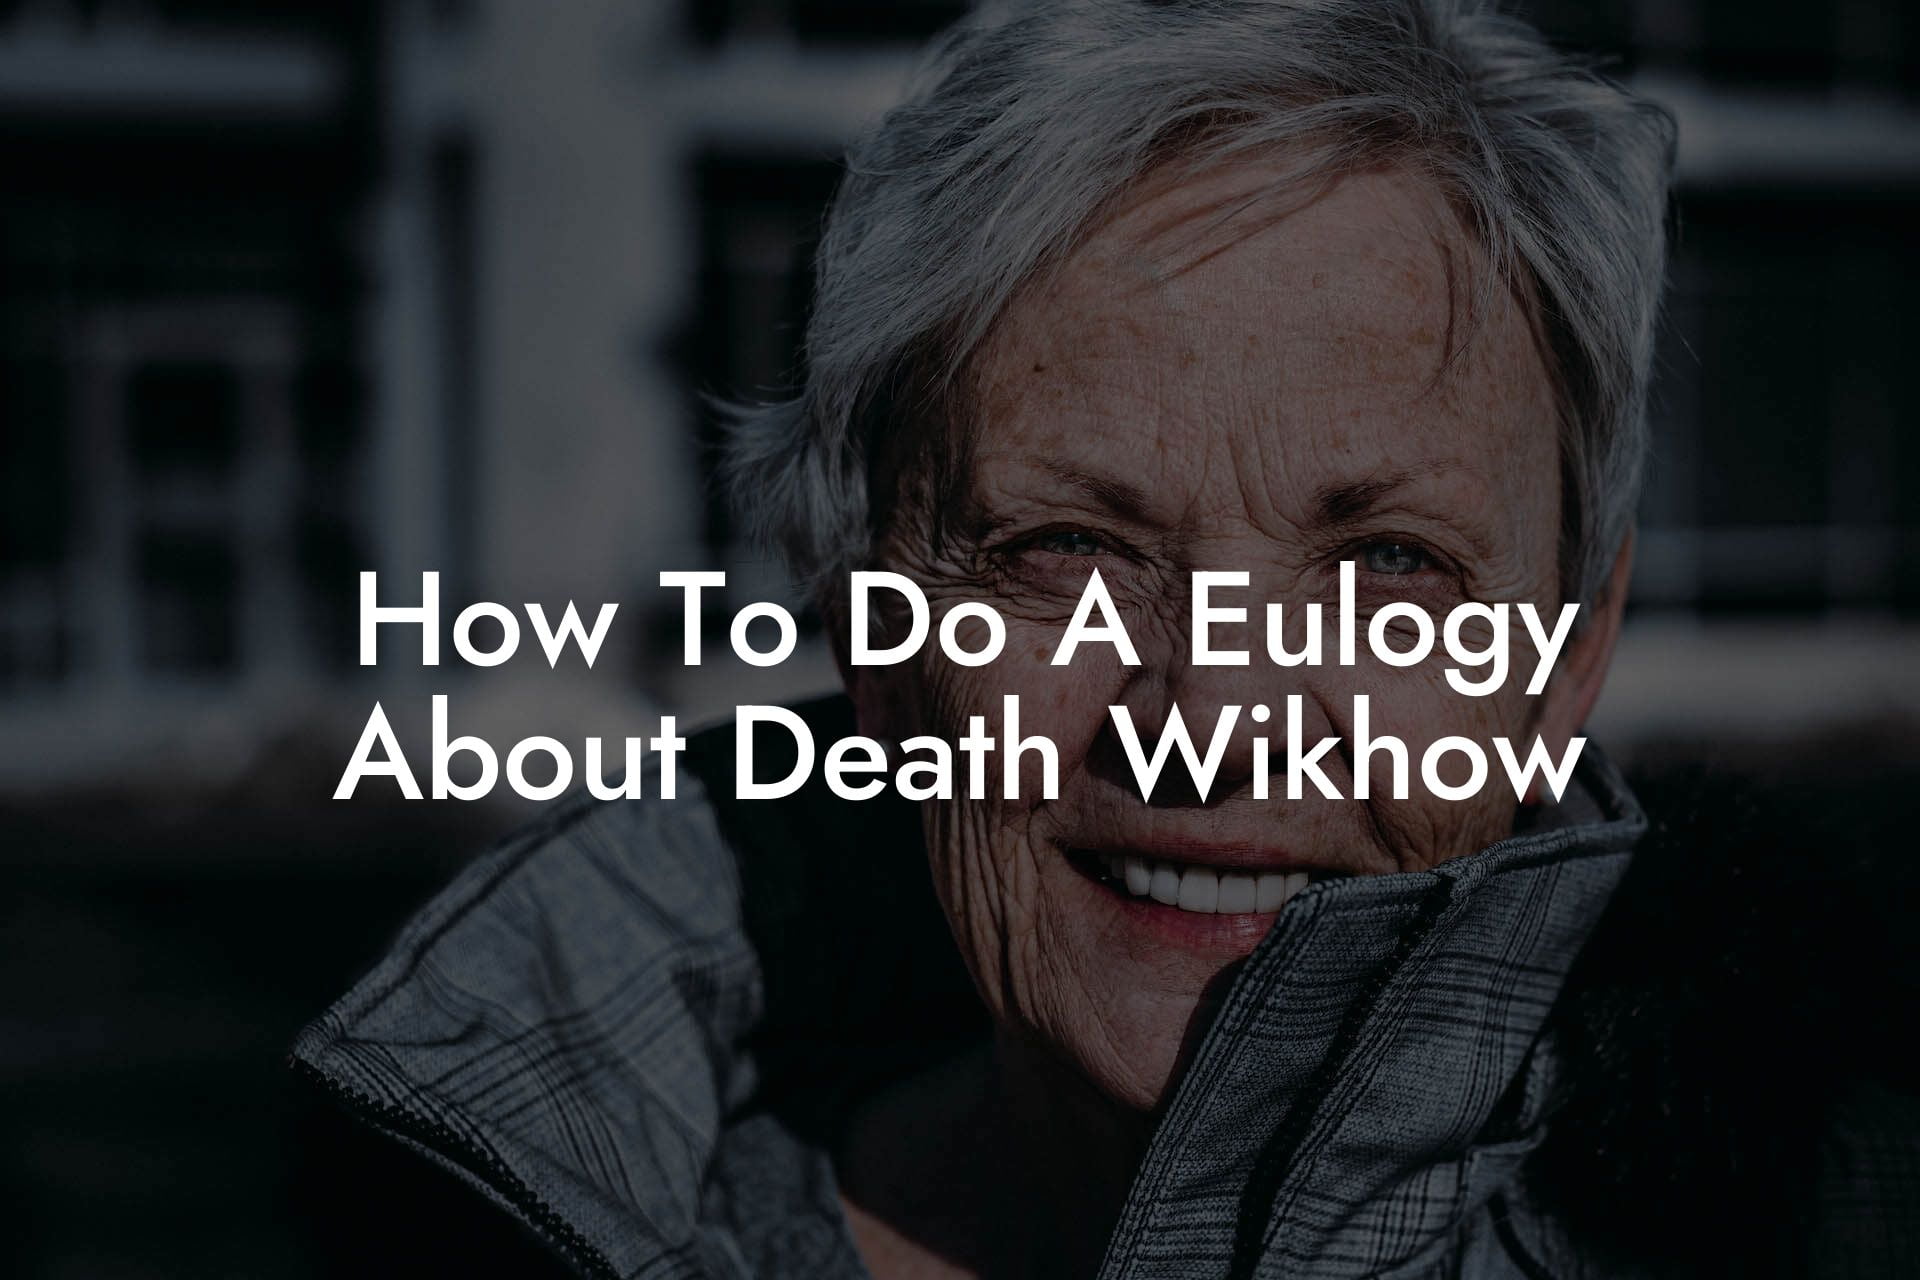 How To Do A Eulogy About Death Wikhow